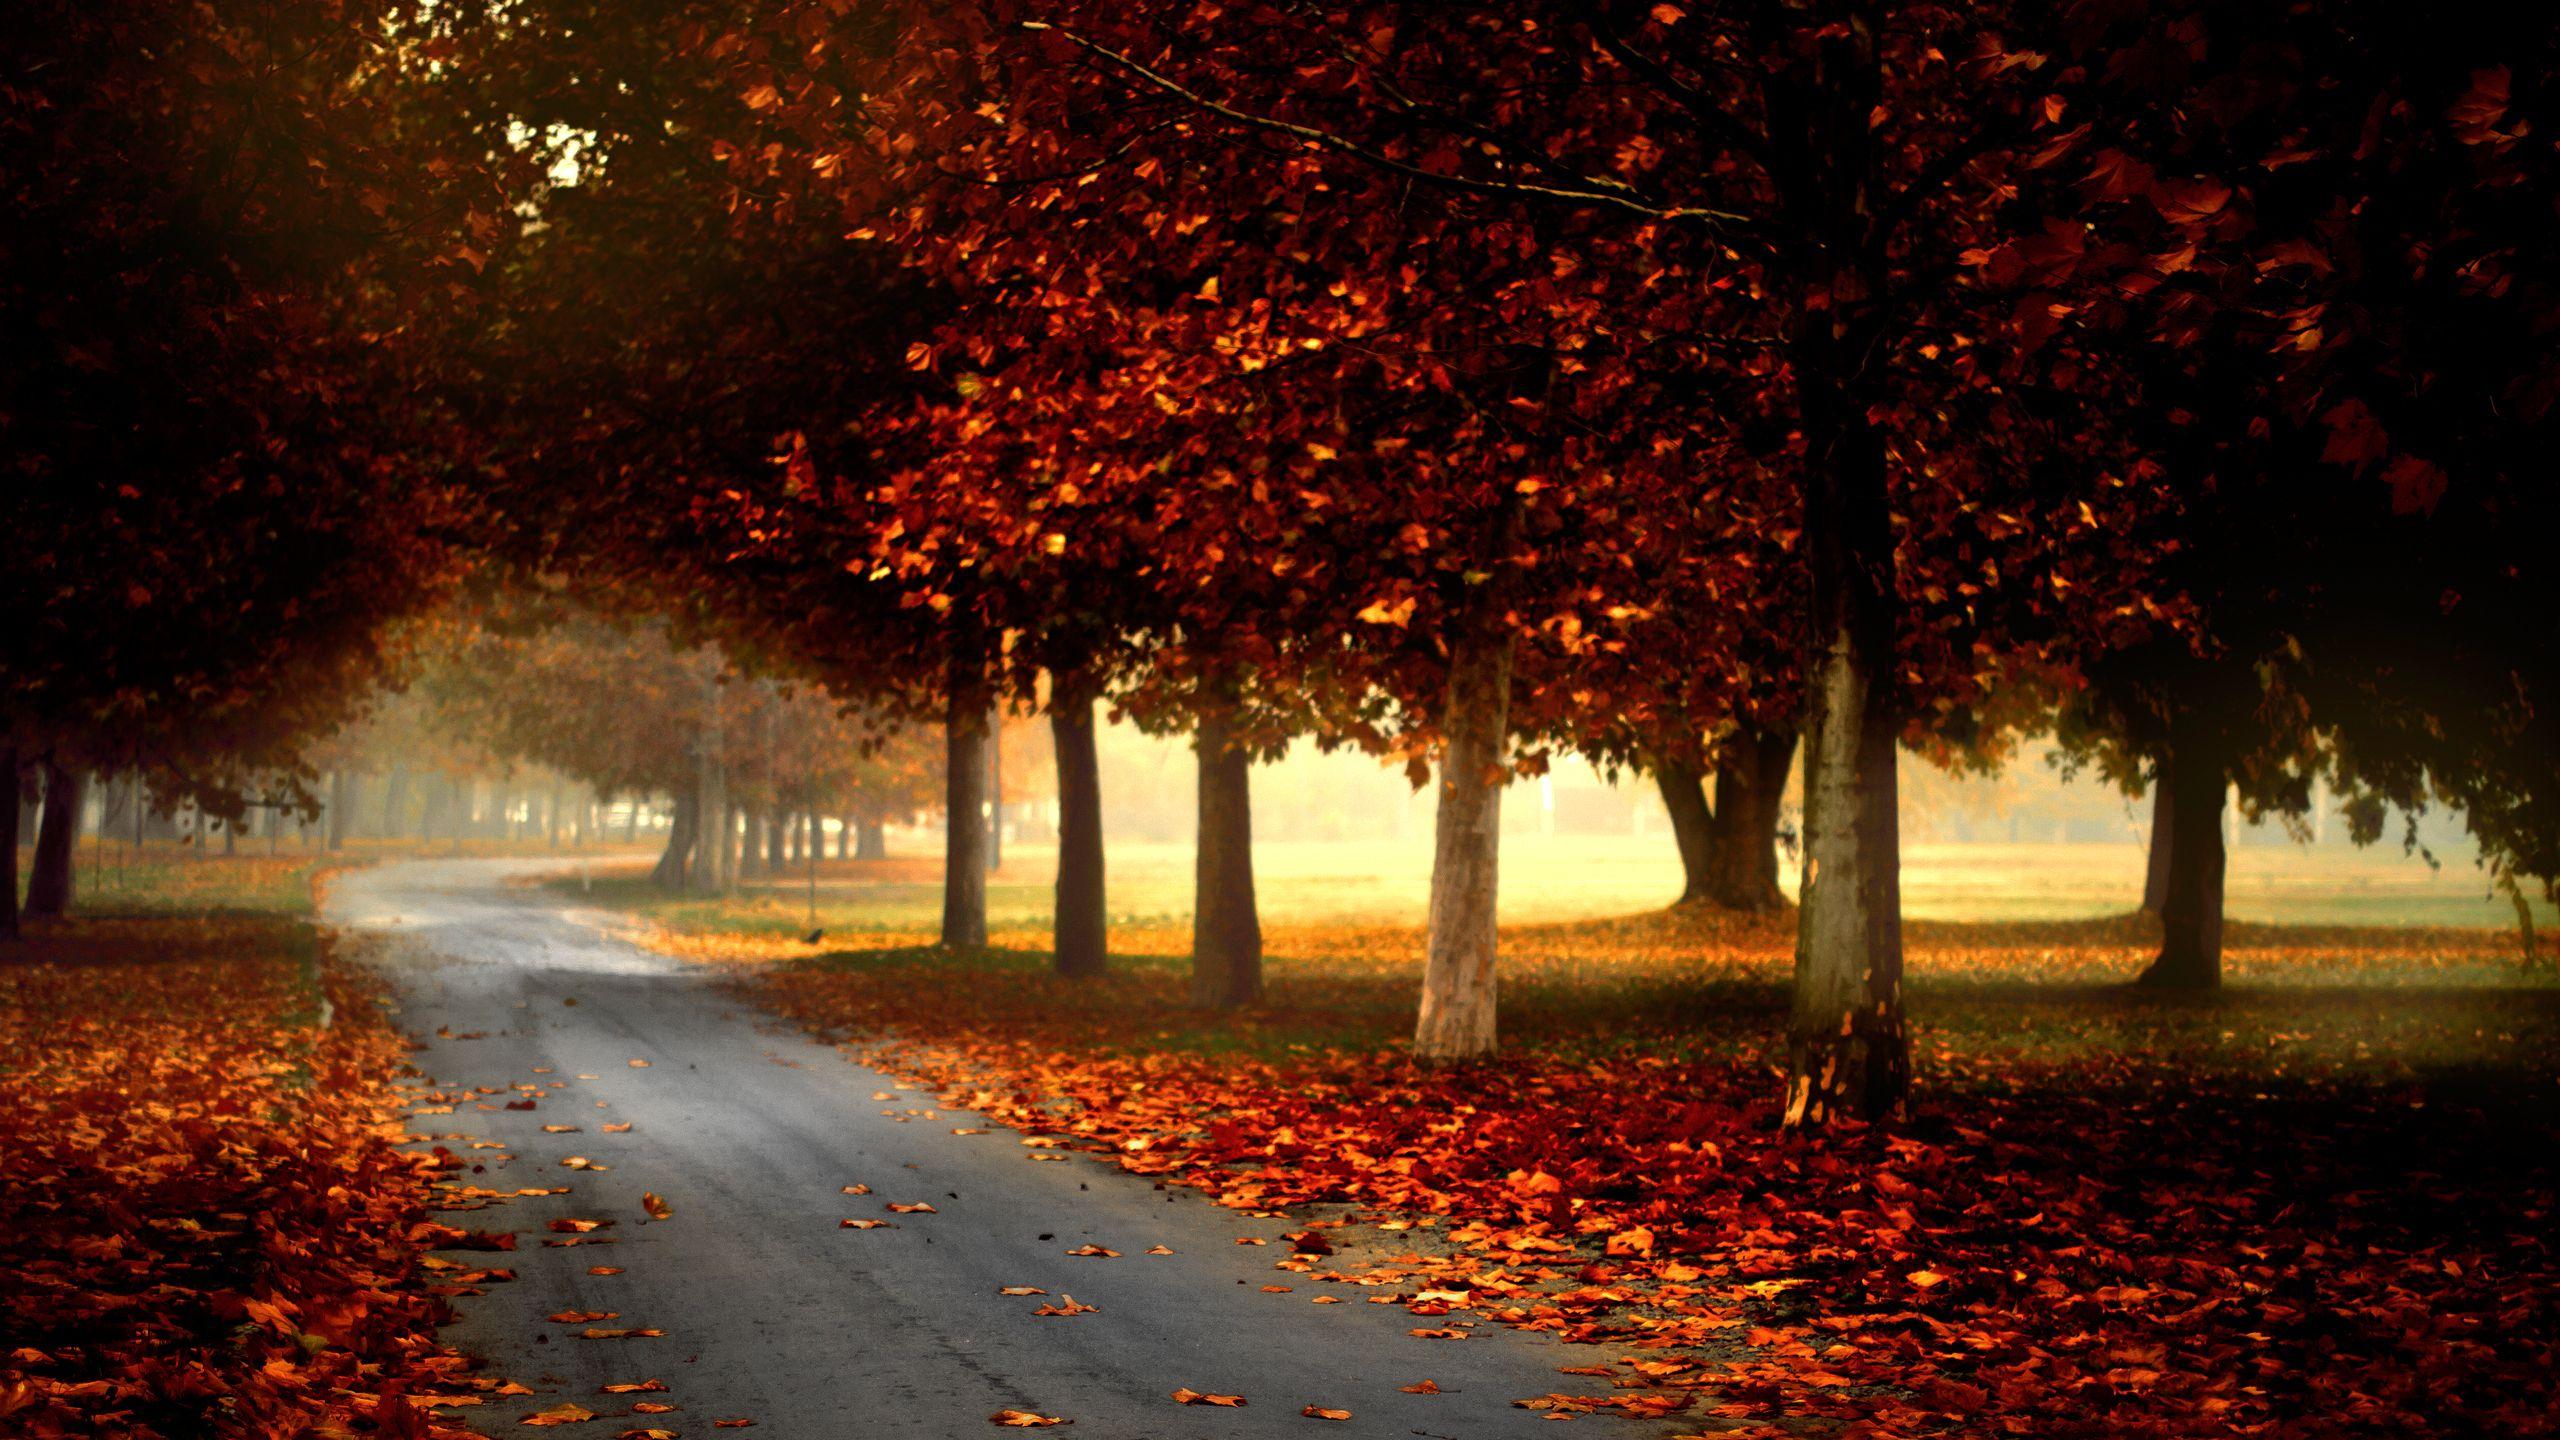 Country road in autumn wallpaper. Autumn wallpaper hd, Forest landscape, Photography wallpaper